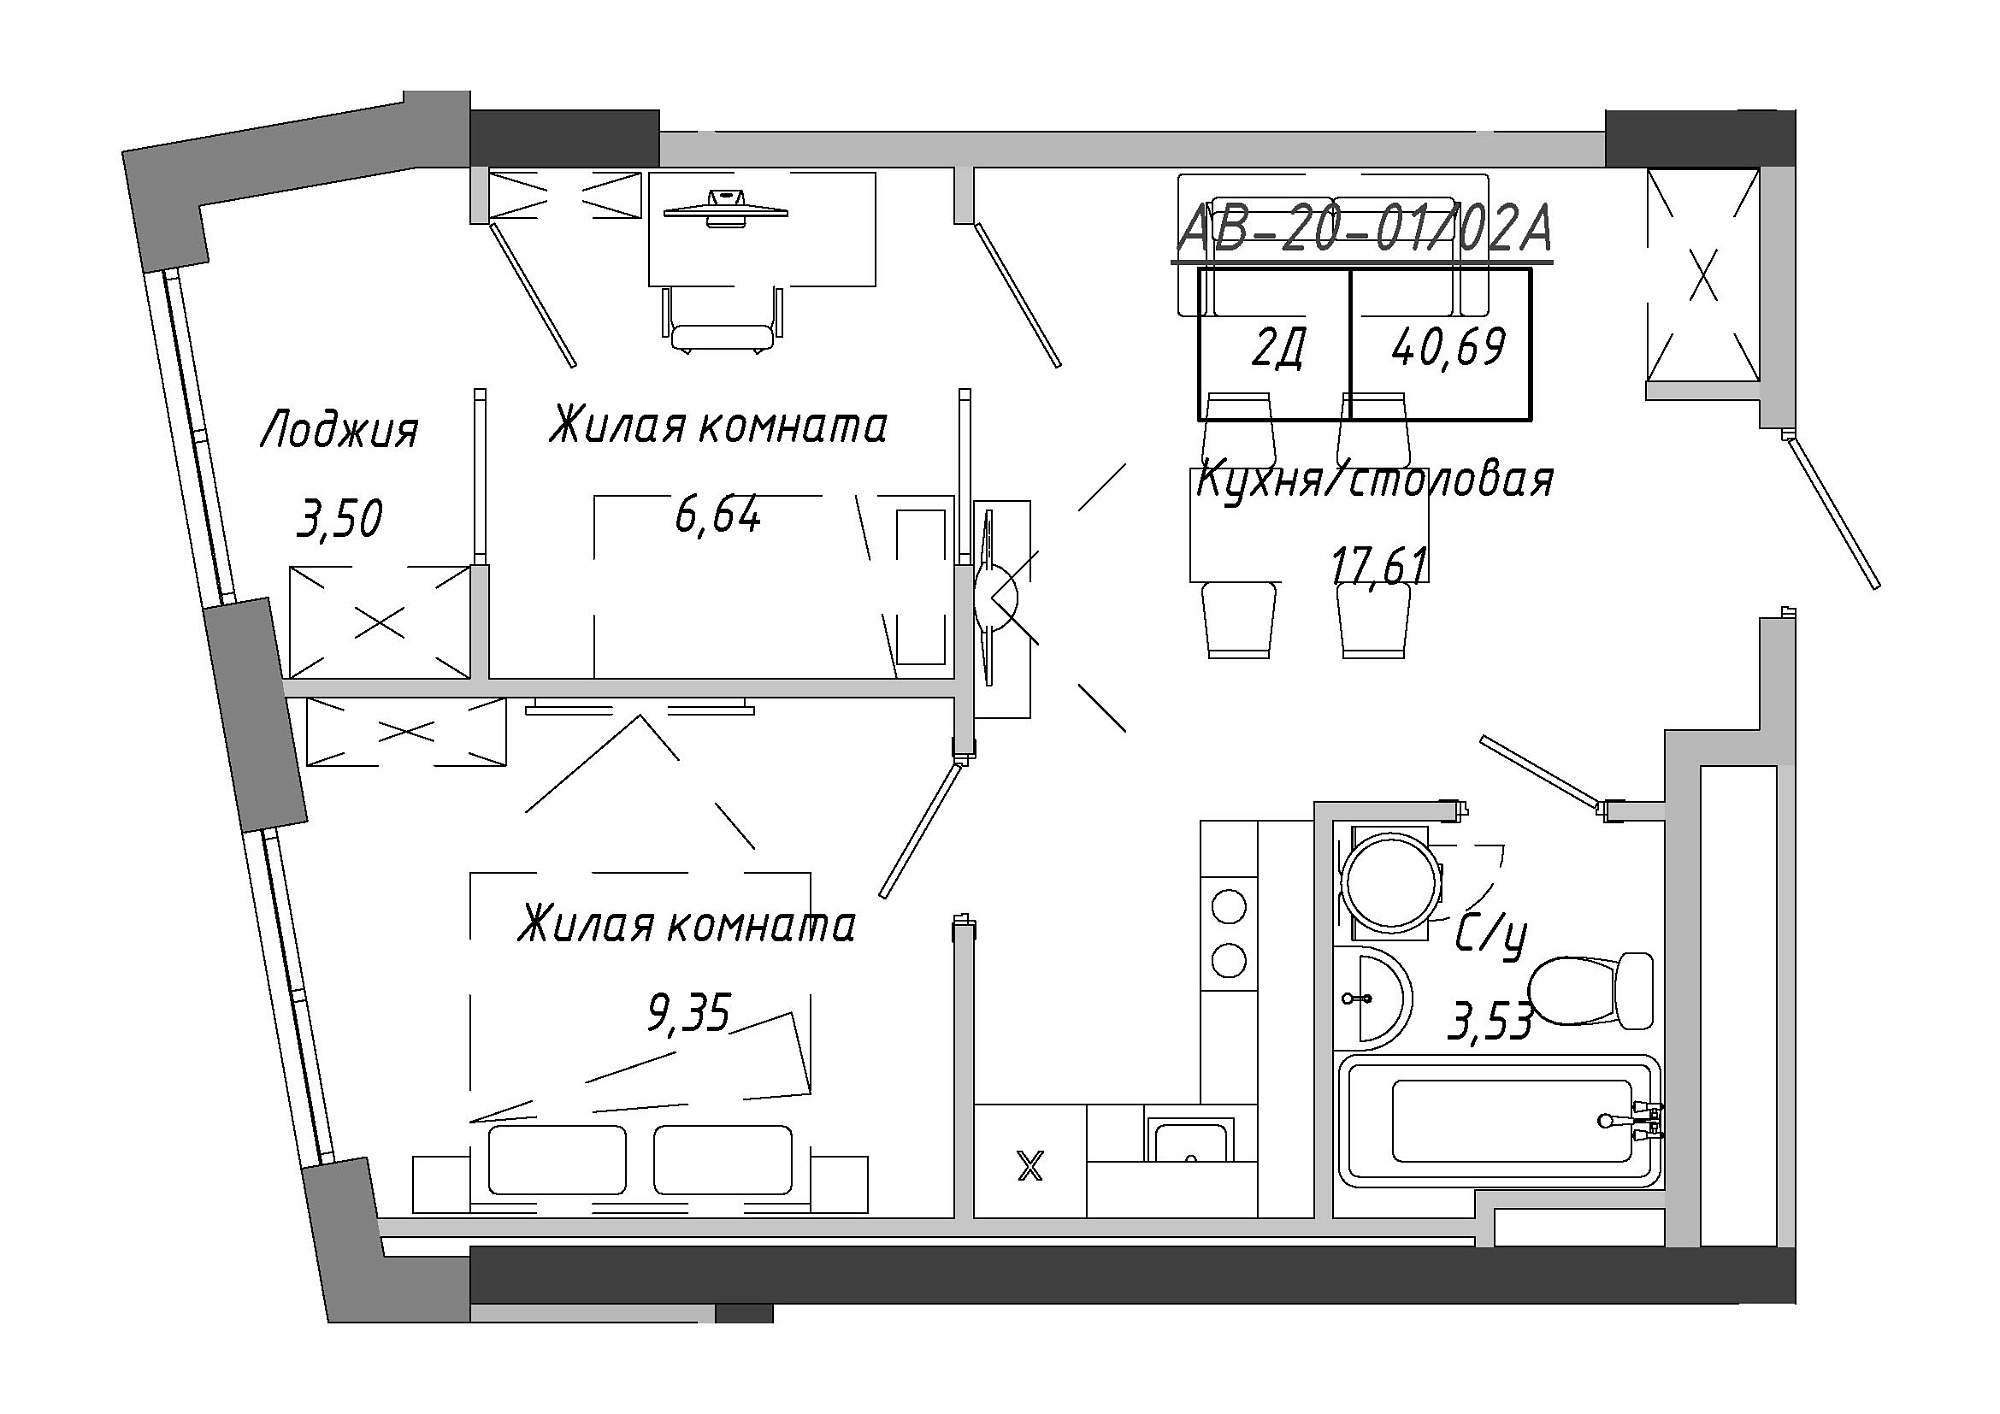 Planning 2-rm flats area 40.69m2, AB-20-01/0002а.